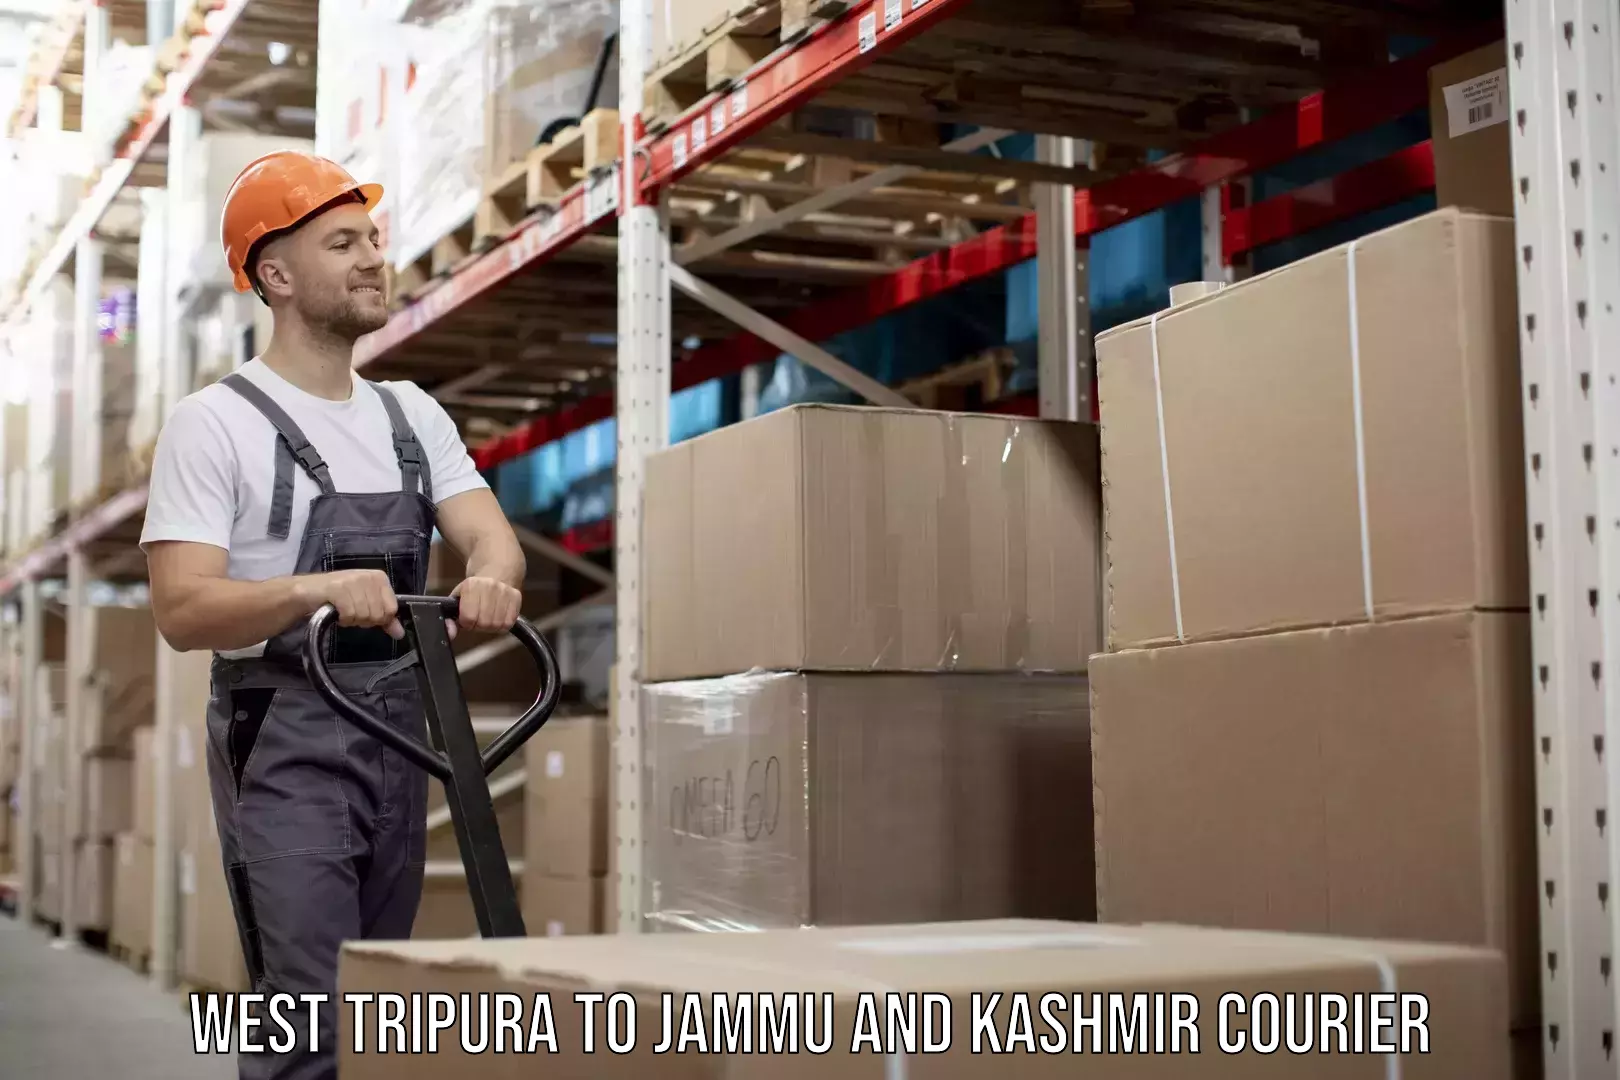 Efficient shipping operations West Tripura to Jammu and Kashmir